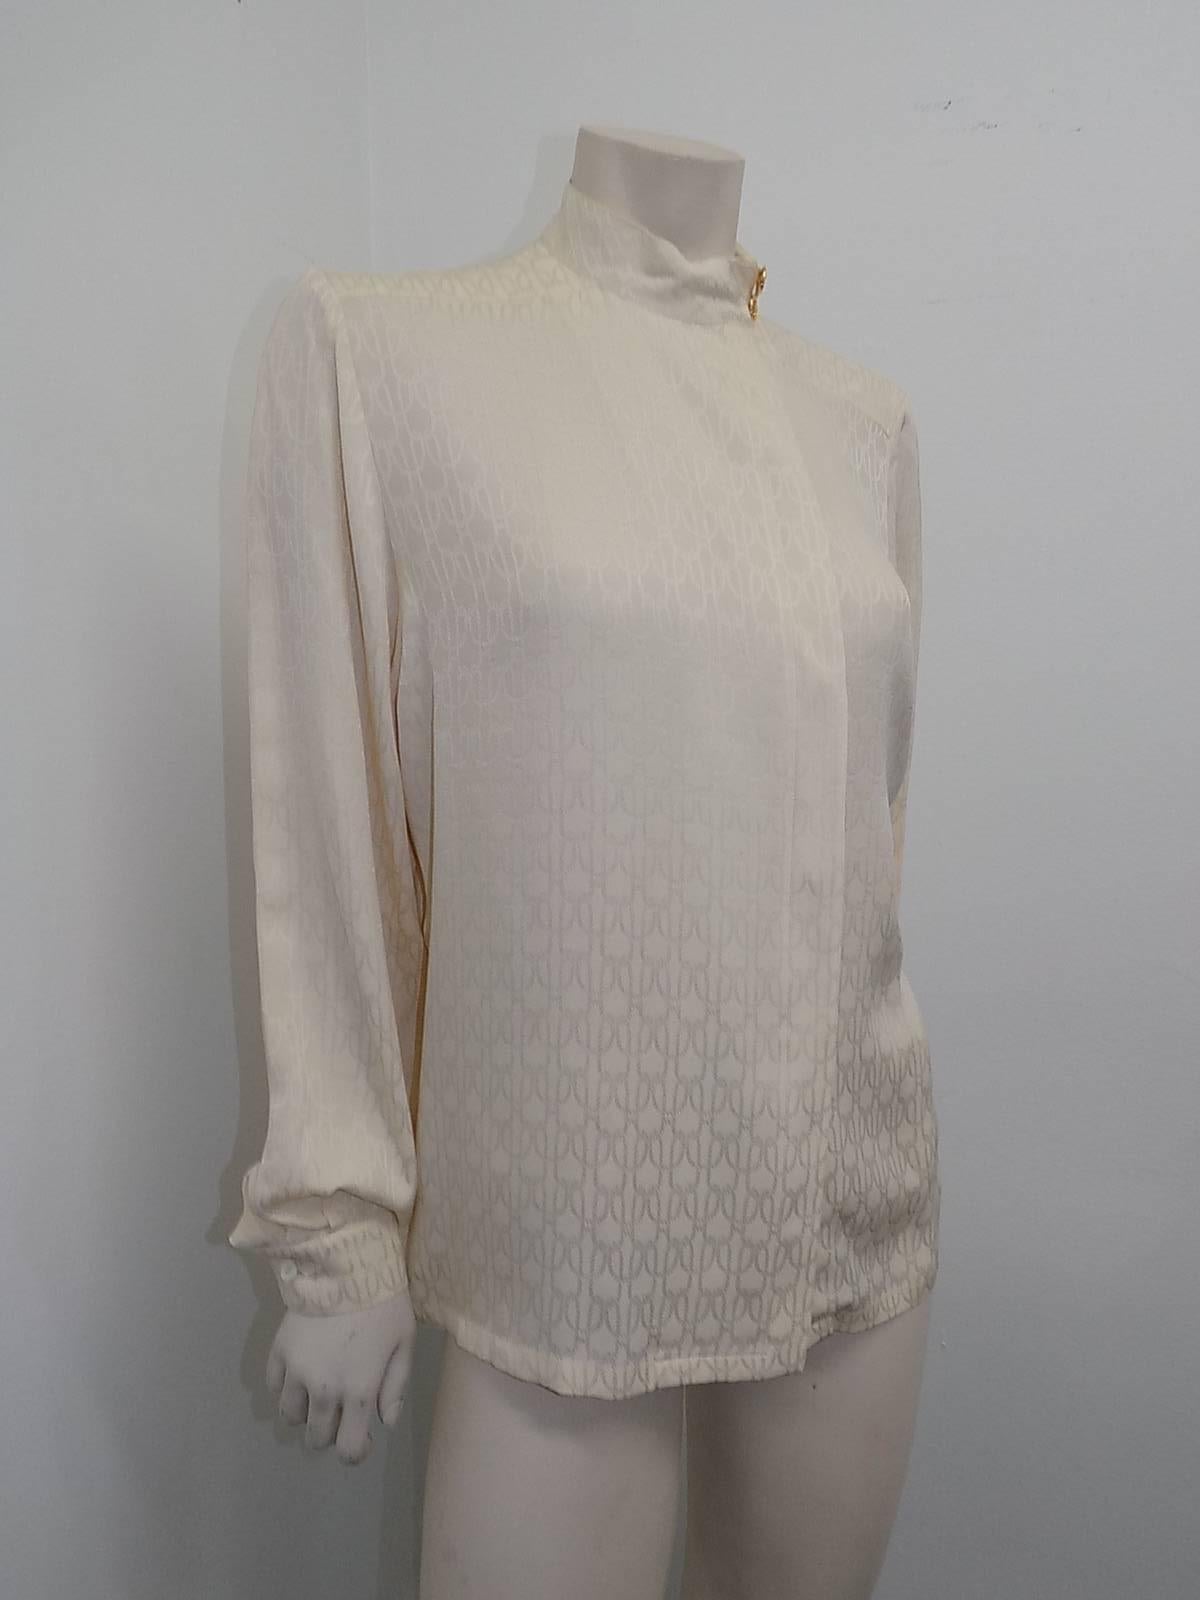 Hermes Truly  Stunning Jacquard silk print creme blouse featuring side concealed button down closure, Russian collar  with two amazing vintage Hermes large buttons . 100% silk  size 42 shoulder 15 1/2" bust 44"
 length 25 "sleeves